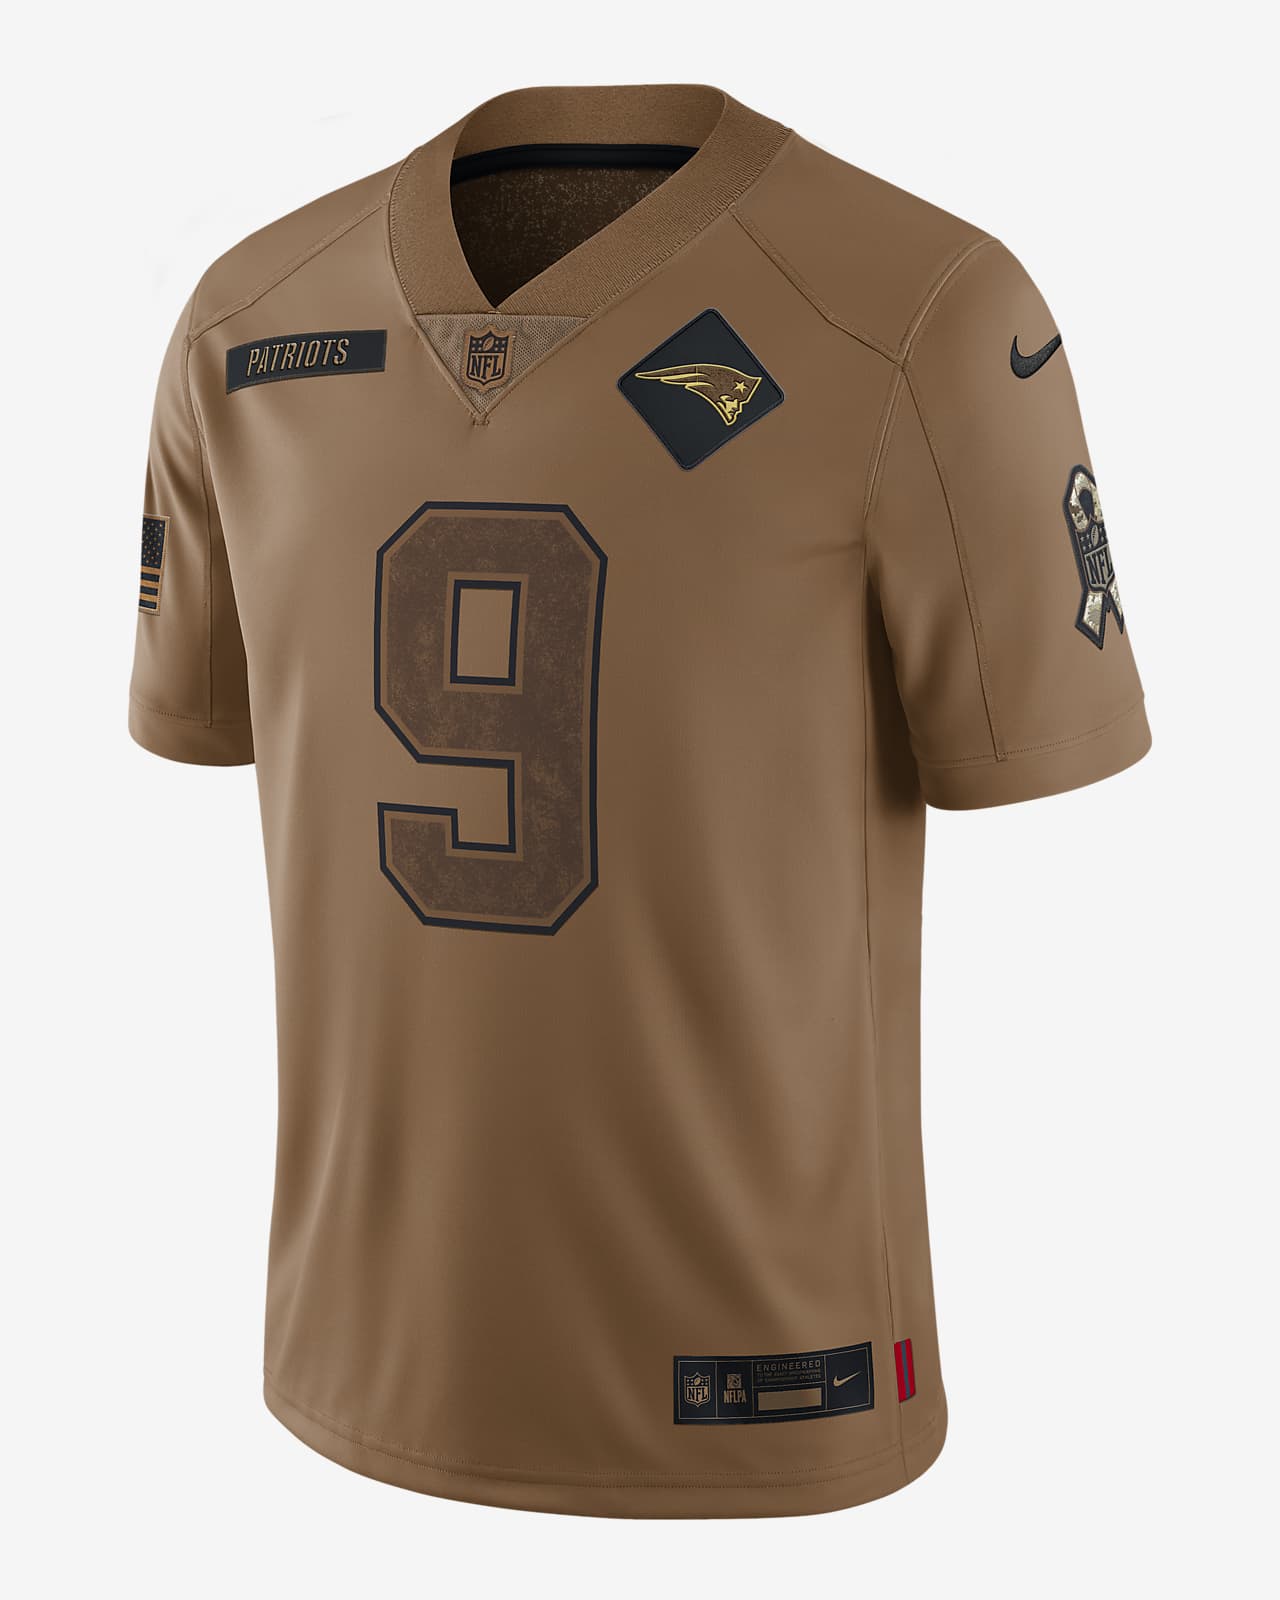 Matthew Judon New England Patriots Salute to Service Nike Men's Dri-Fit NFL Limited Jersey in Brown, Size: Small | 01AV2EAF3L-Z21